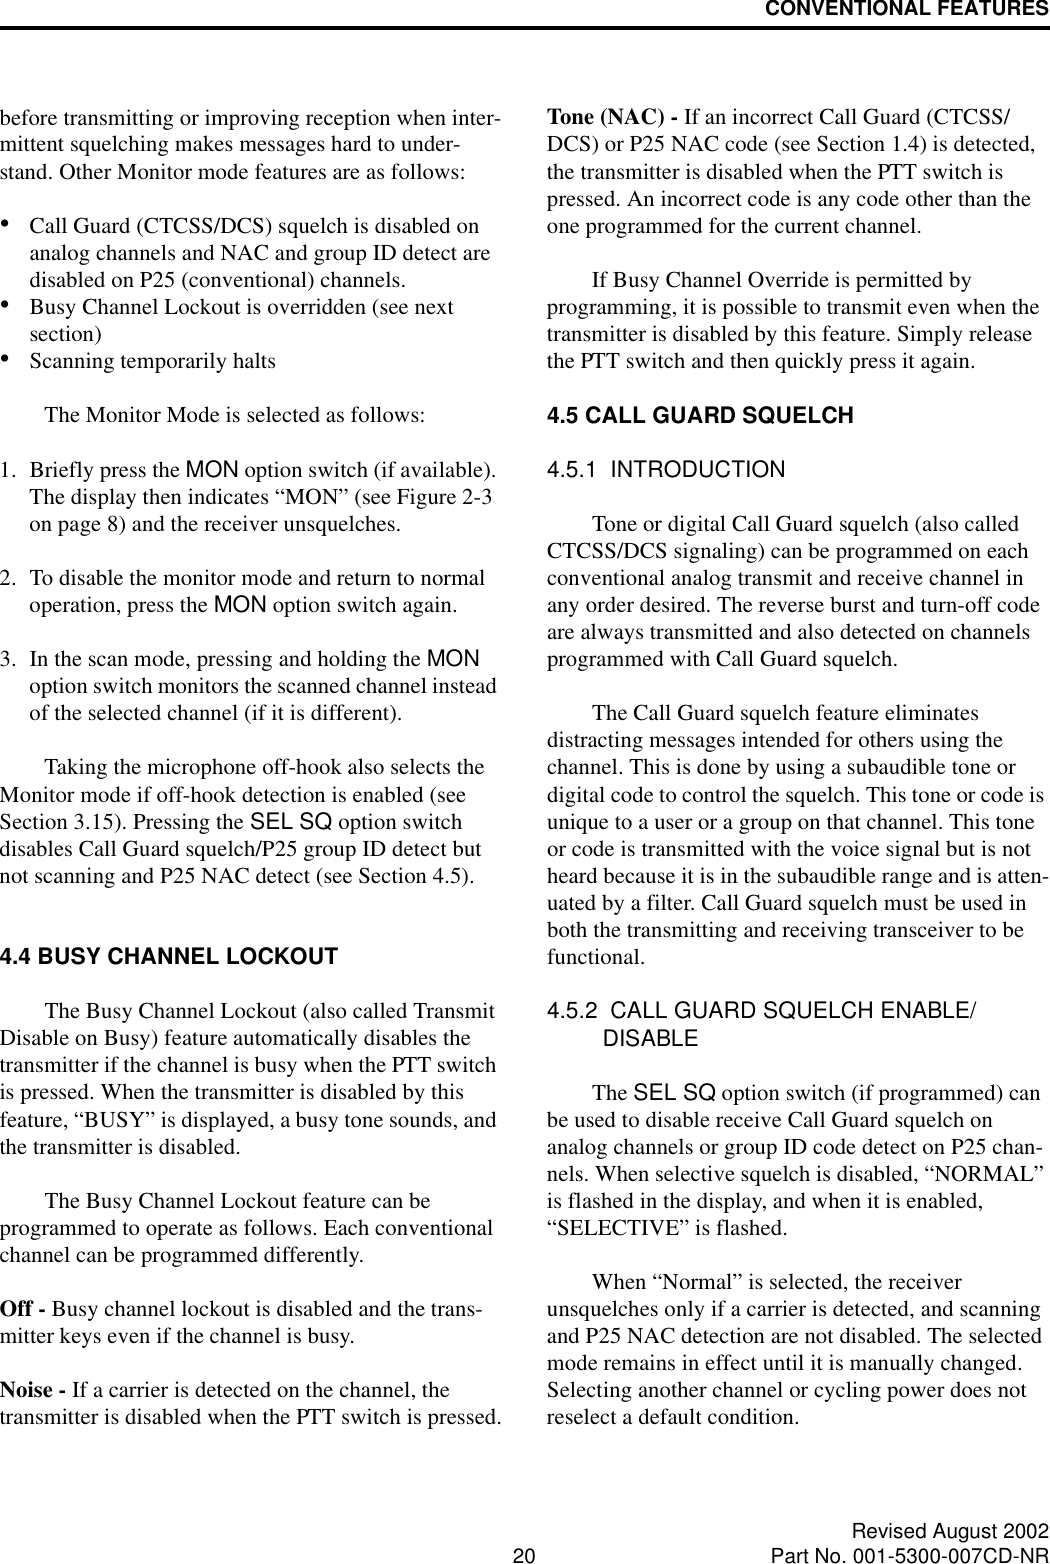 CONVENTIONAL FEATURES20 Revised August 2002Part No. 001-5300-007CD-NRbefore transmitting or improving reception when inter-mittent squelching makes messages hard to under-stand. Other Monitor mode features are as follows:•Call Guard (CTCSS/DCS) squelch is disabled on analog channels and NAC and group ID detect are disabled on P25 (conventional) channels. •Busy Channel Lockout is overridden (see next section)•Scanning temporarily halts The Monitor Mode is selected as follows:1. Briefly press the MON option switch (if available). The display then indicates “MON” (see Figure 2-3 on page 8) and the receiver unsquelches. 2. To disable the monitor mode and return to normal operation, press the MON option switch again.3. In the scan mode, pressing and holding the MON option switch monitors the scanned channel instead of the selected channel (if it is different).Taking the microphone off-hook also selects the Monitor mode if off-hook detection is enabled (see Section 3.15). Pressing the SEL SQ option switch disables Call Guard squelch/P25 group ID detect but not scanning and P25 NAC detect (see Section 4.5). 4.4 BUSY CHANNEL LOCKOUTThe Busy Channel Lockout (also called Transmit Disable on Busy) feature automatically disables the transmitter if the channel is busy when the PTT switch is pressed. When the transmitter is disabled by this feature, “BUSY” is displayed, a busy tone sounds, and the transmitter is disabled.The Busy Channel Lockout feature can be programmed to operate as follows. Each conventional channel can be programmed differently.Off - Busy channel lockout is disabled and the trans-mitter keys even if the channel is busy.Noise - If a carrier is detected on the channel, the transmitter is disabled when the PTT switch is pressed.Tone (NAC) - If an incorrect Call Guard (CTCSS/DCS) or P25 NAC code (see Section 1.4) is detected, the transmitter is disabled when the PTT switch is pressed. An incorrect code is any code other than the one programmed for the current channel.If Busy Channel Override is permitted by programming, it is possible to transmit even when the transmitter is disabled by this feature. Simply release the PTT switch and then quickly press it again.4.5 CALL GUARD SQUELCH4.5.1  INTRODUCTIONTone or digital Call Guard squelch (also called CTCSS/DCS signaling) can be programmed on each conventional analog transmit and receive channel in any order desired. The reverse burst and turn-off code are always transmitted and also detected on channels programmed with Call Guard squelch. The Call Guard squelch feature eliminates distracting messages intended for others using the channel. This is done by using a subaudible tone or digital code to control the squelch. This tone or code is unique to a user or a group on that channel. This tone or code is transmitted with the voice signal but is not heard because it is in the subaudible range and is atten-uated by a filter. Call Guard squelch must be used in both the transmitting and receiving transceiver to be functional. 4.5.2  CALL GUARD SQUELCH ENABLE/DISABLEThe SEL SQ option switch (if programmed) can be used to disable receive Call Guard squelch on analog channels or group ID code detect on P25 chan-nels. When selective squelch is disabled, “NORMAL” is flashed in the display, and when it is enabled, “SELECTIVE” is flashed. When “Normal” is selected, the receiver unsquelches only if a carrier is detected, and scanning and P25 NAC detection are not disabled. The selected mode remains in effect until it is manually changed. Selecting another channel or cycling power does not reselect a default condition. 